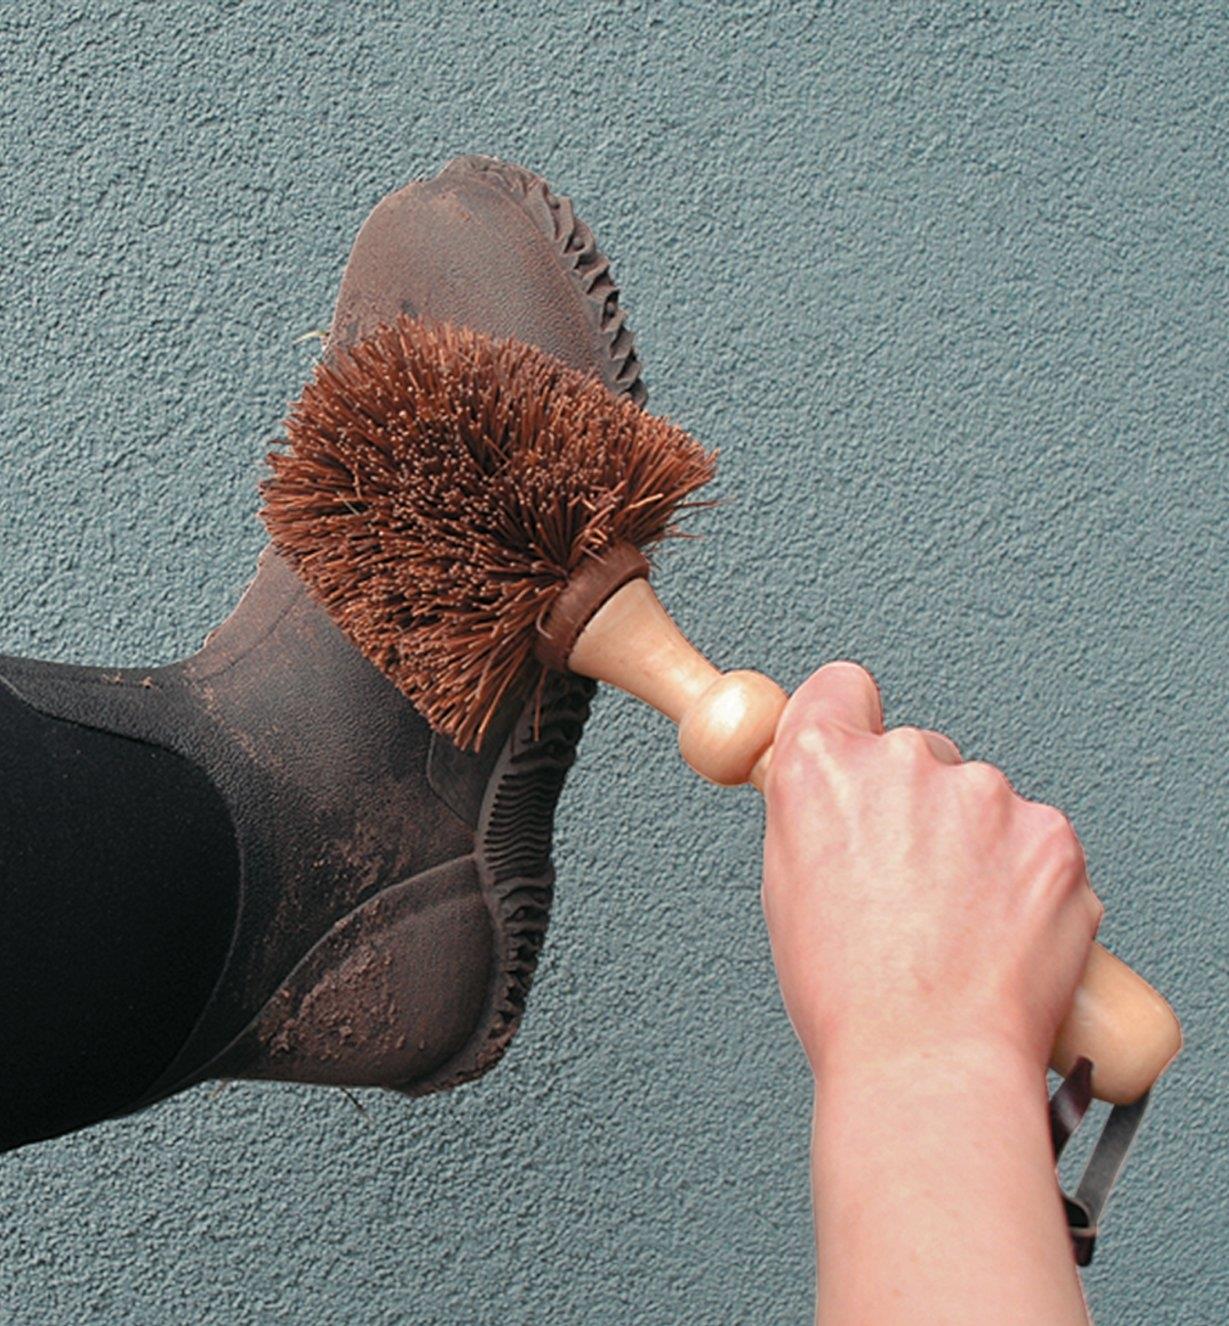 Cleaning a boot with the Heavy-Duty Brush